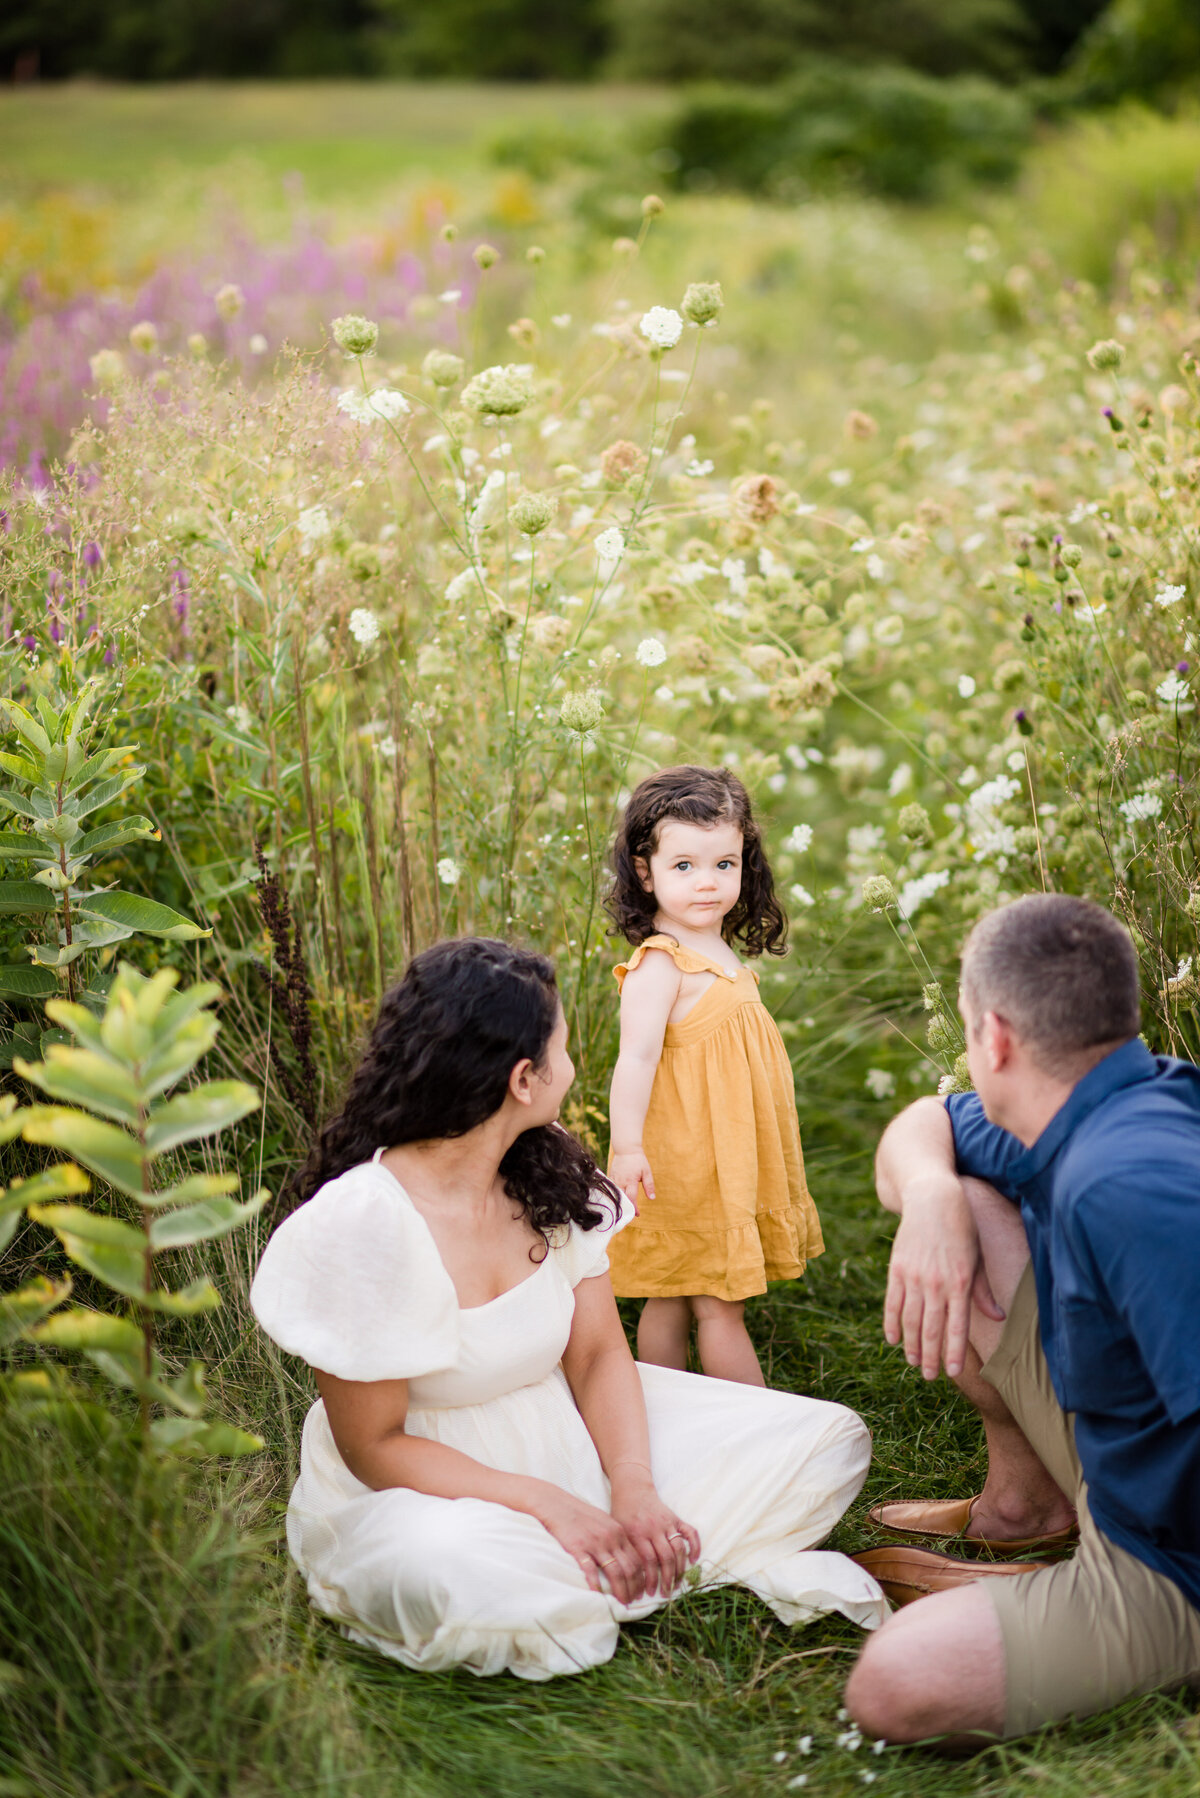 Boston-family-photographer-bella-wang-photography-Lifestyle-session-outdoor-wildflower-67